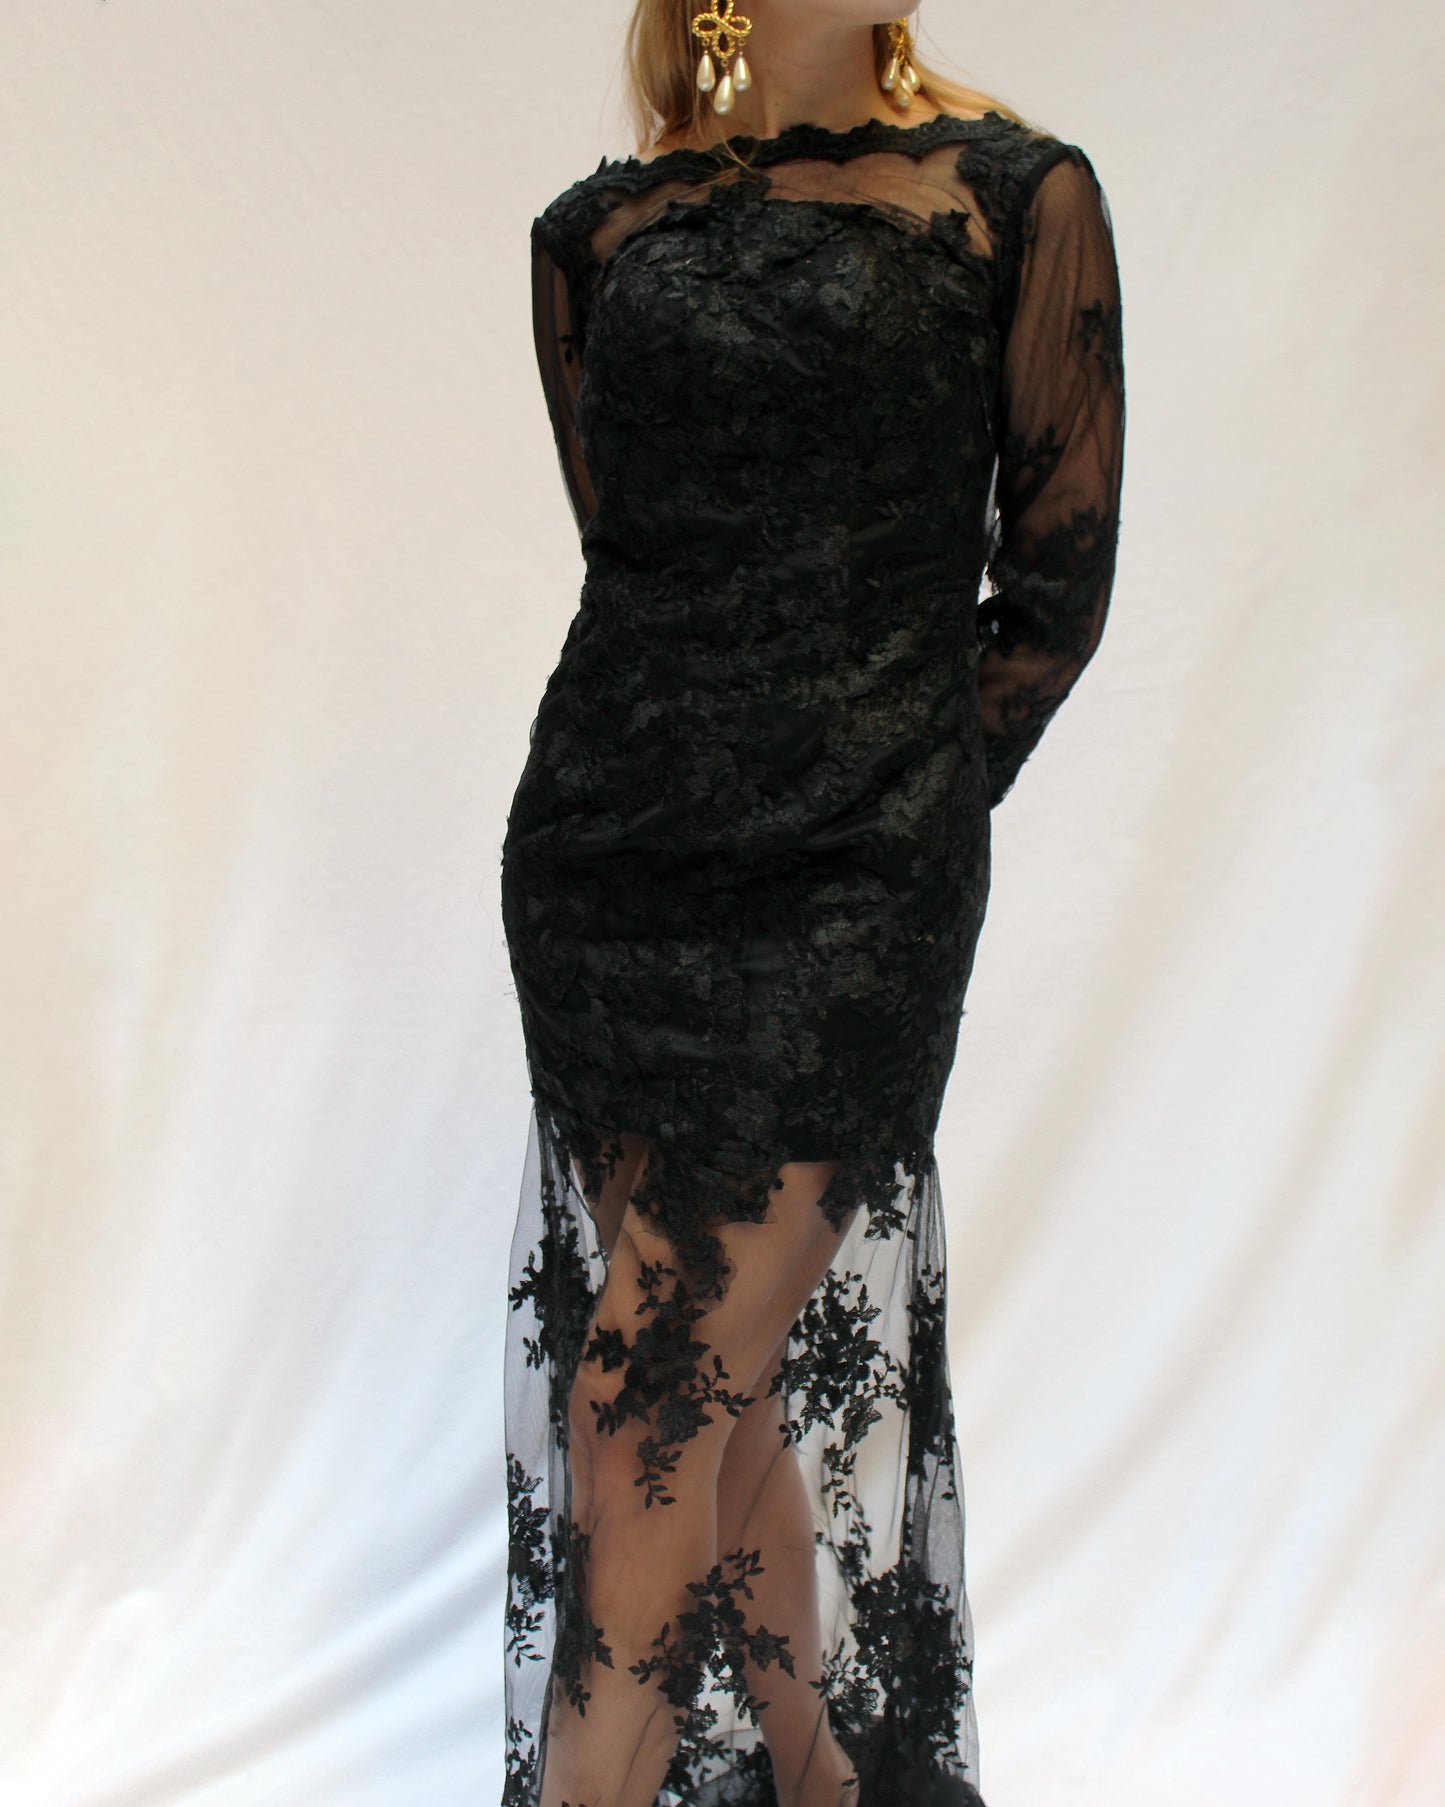 VINTAGE BLACK LACE GOWN, IN THE STYLE OF DOLCE & GABBANA